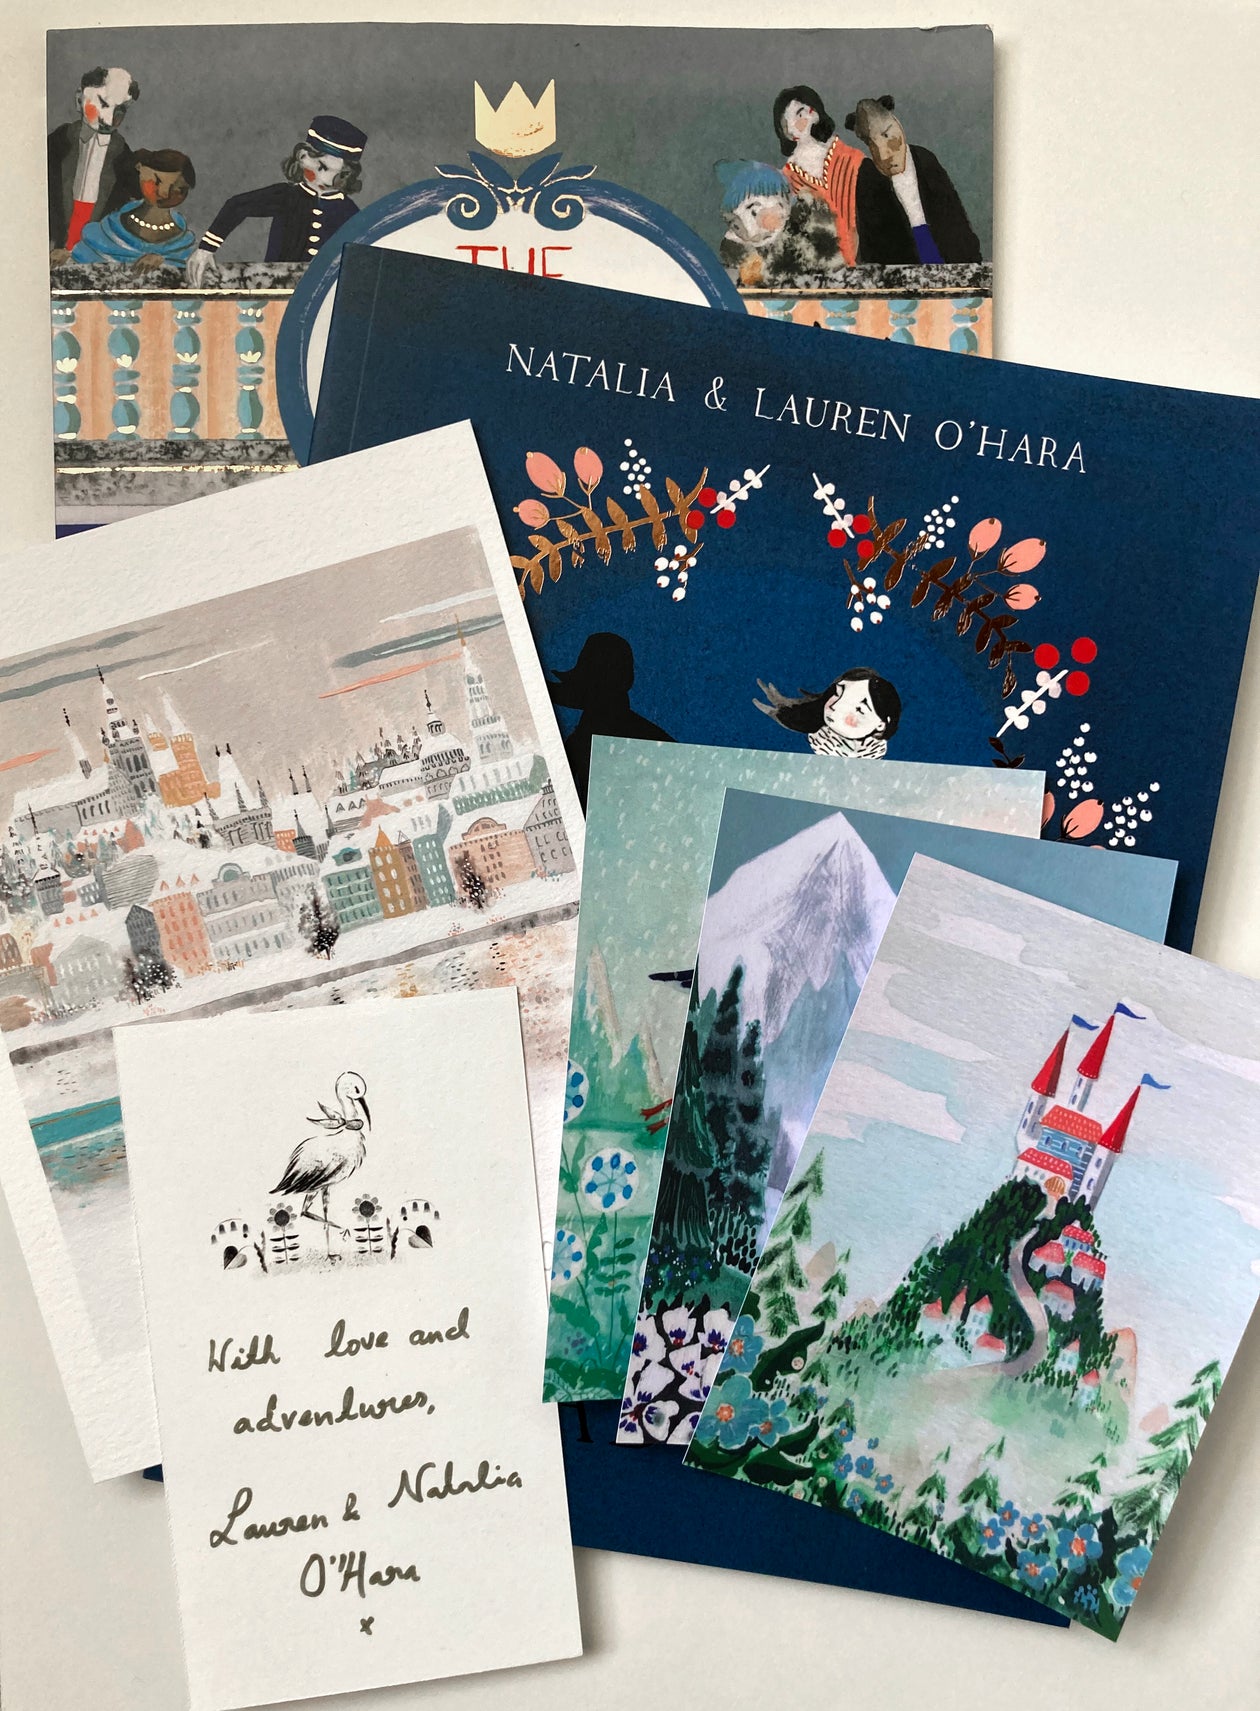 *BUNDLE INCLUDING SIGNED COPIES* Natalia O'Hara: Hortense and the Shadow AND The Bandit Queen, illustrated by Lauren O'Hara